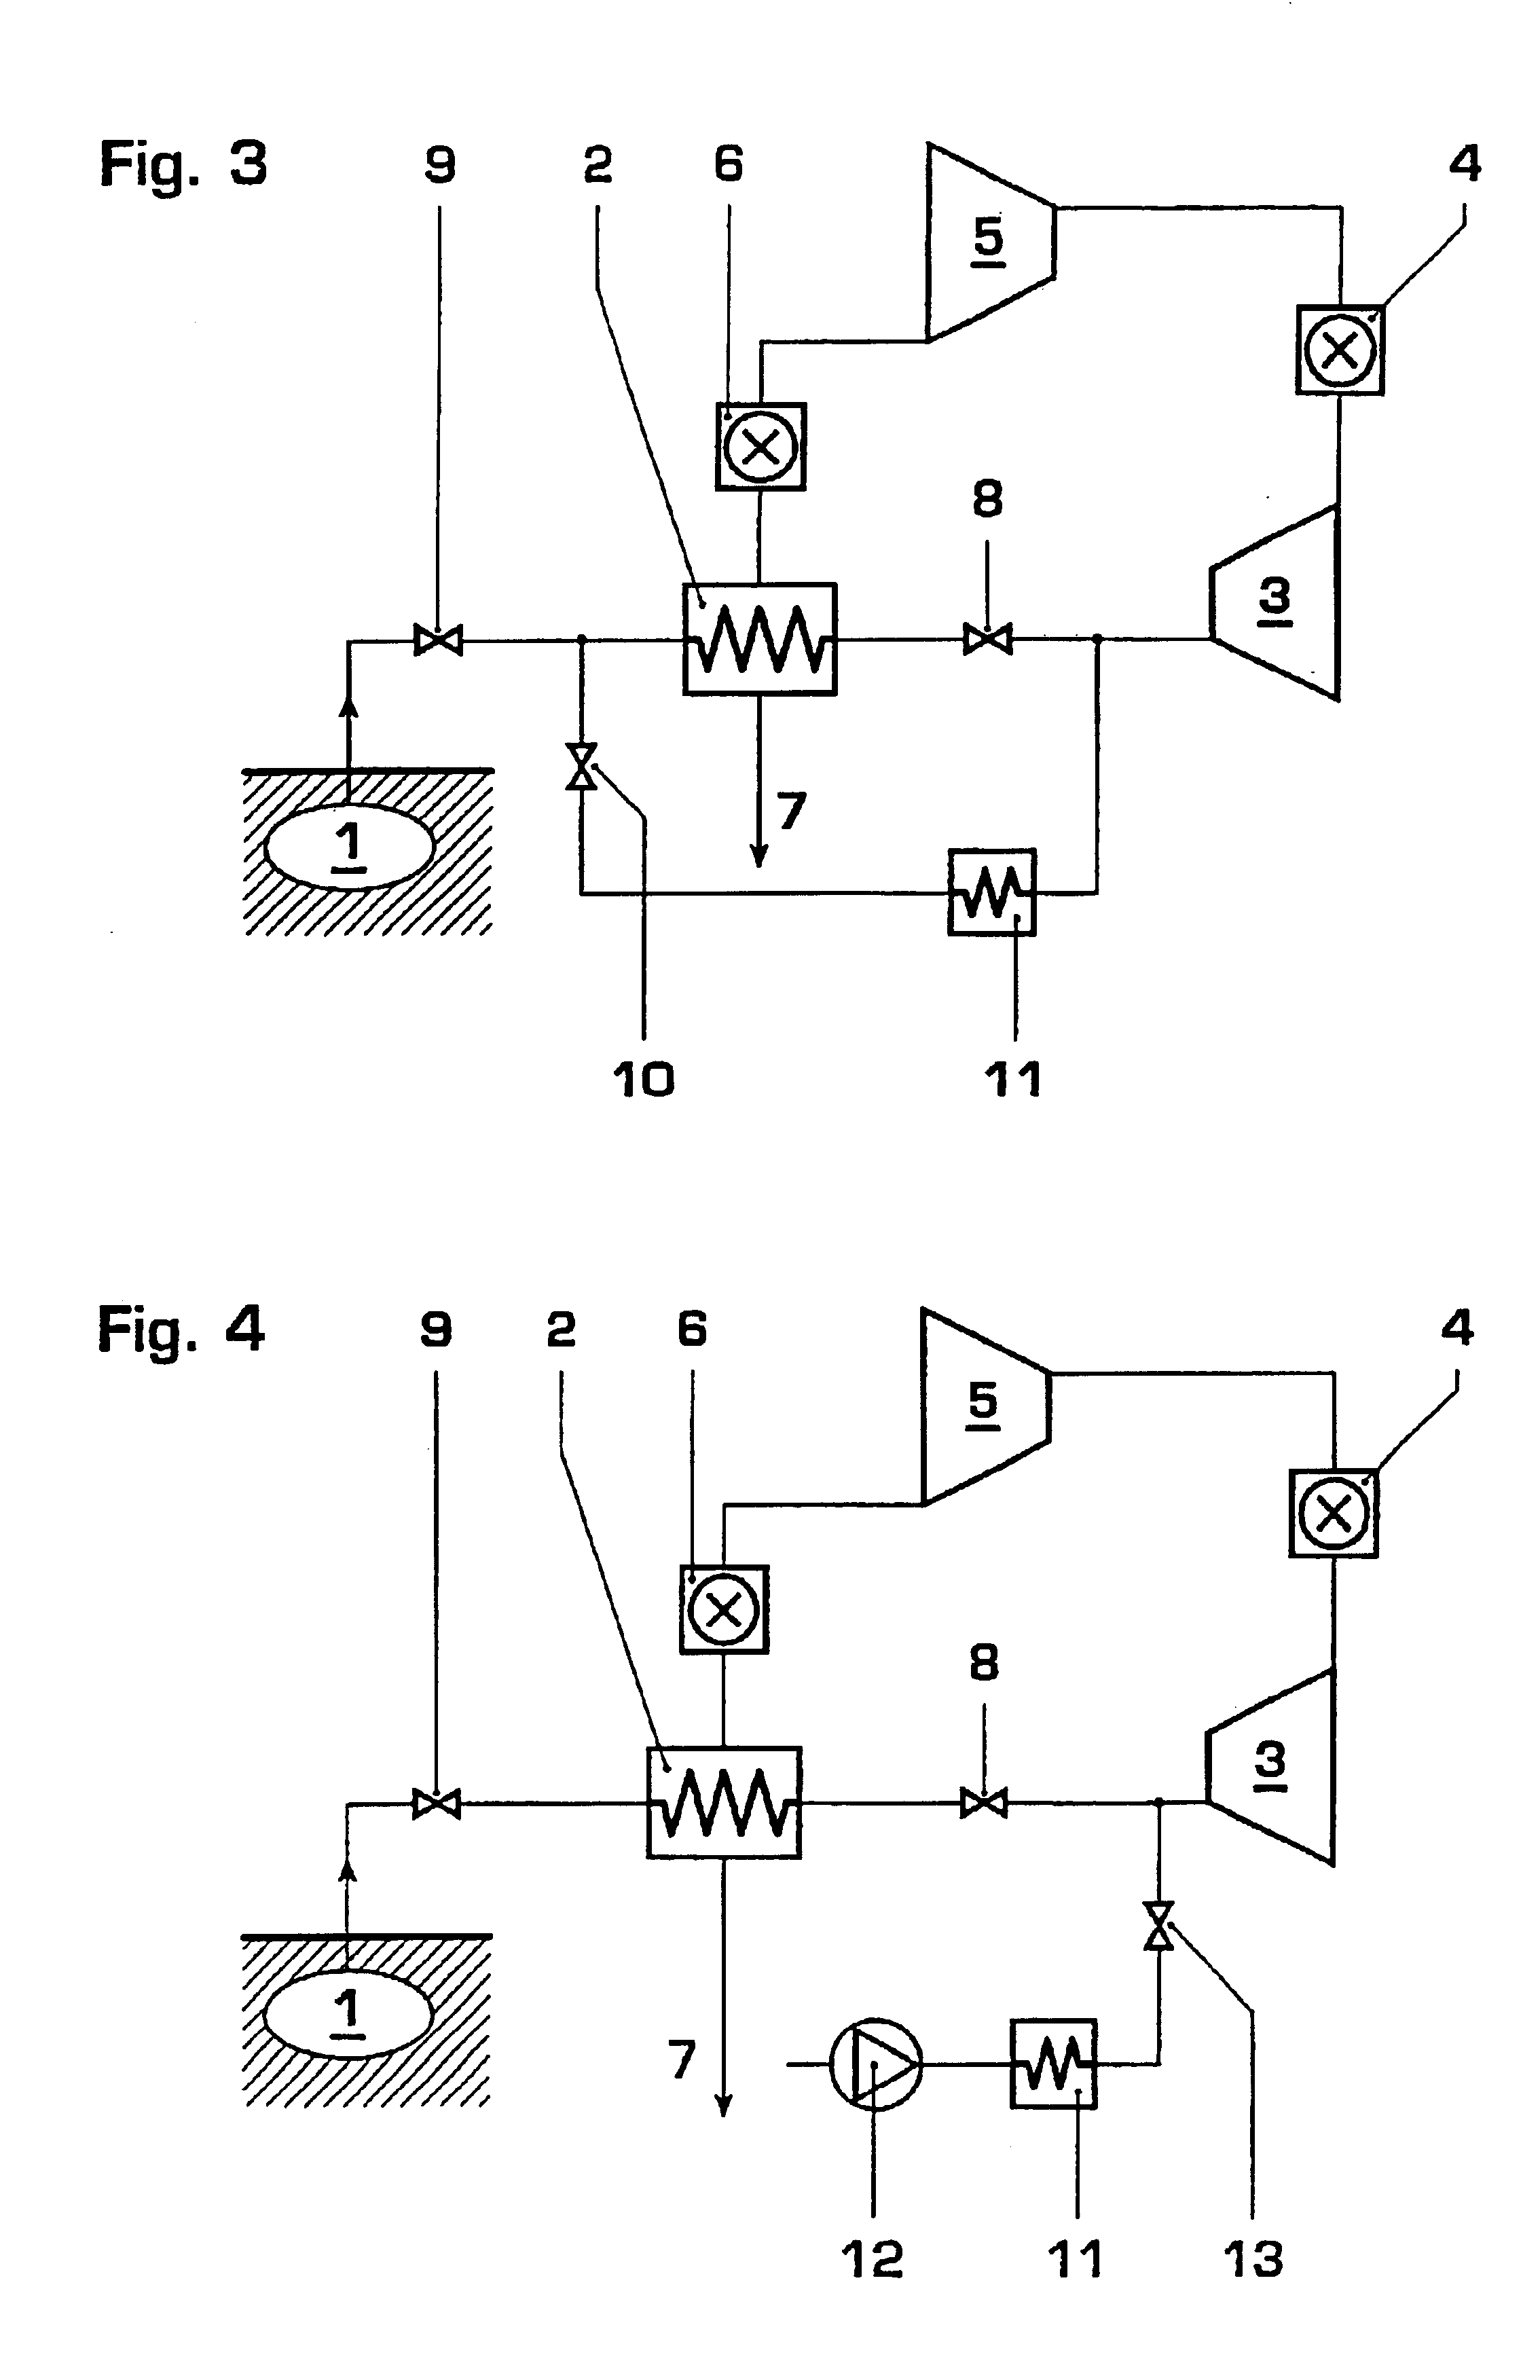 Compressed air energy storage system having a standby warm keeping system including an electric air heater